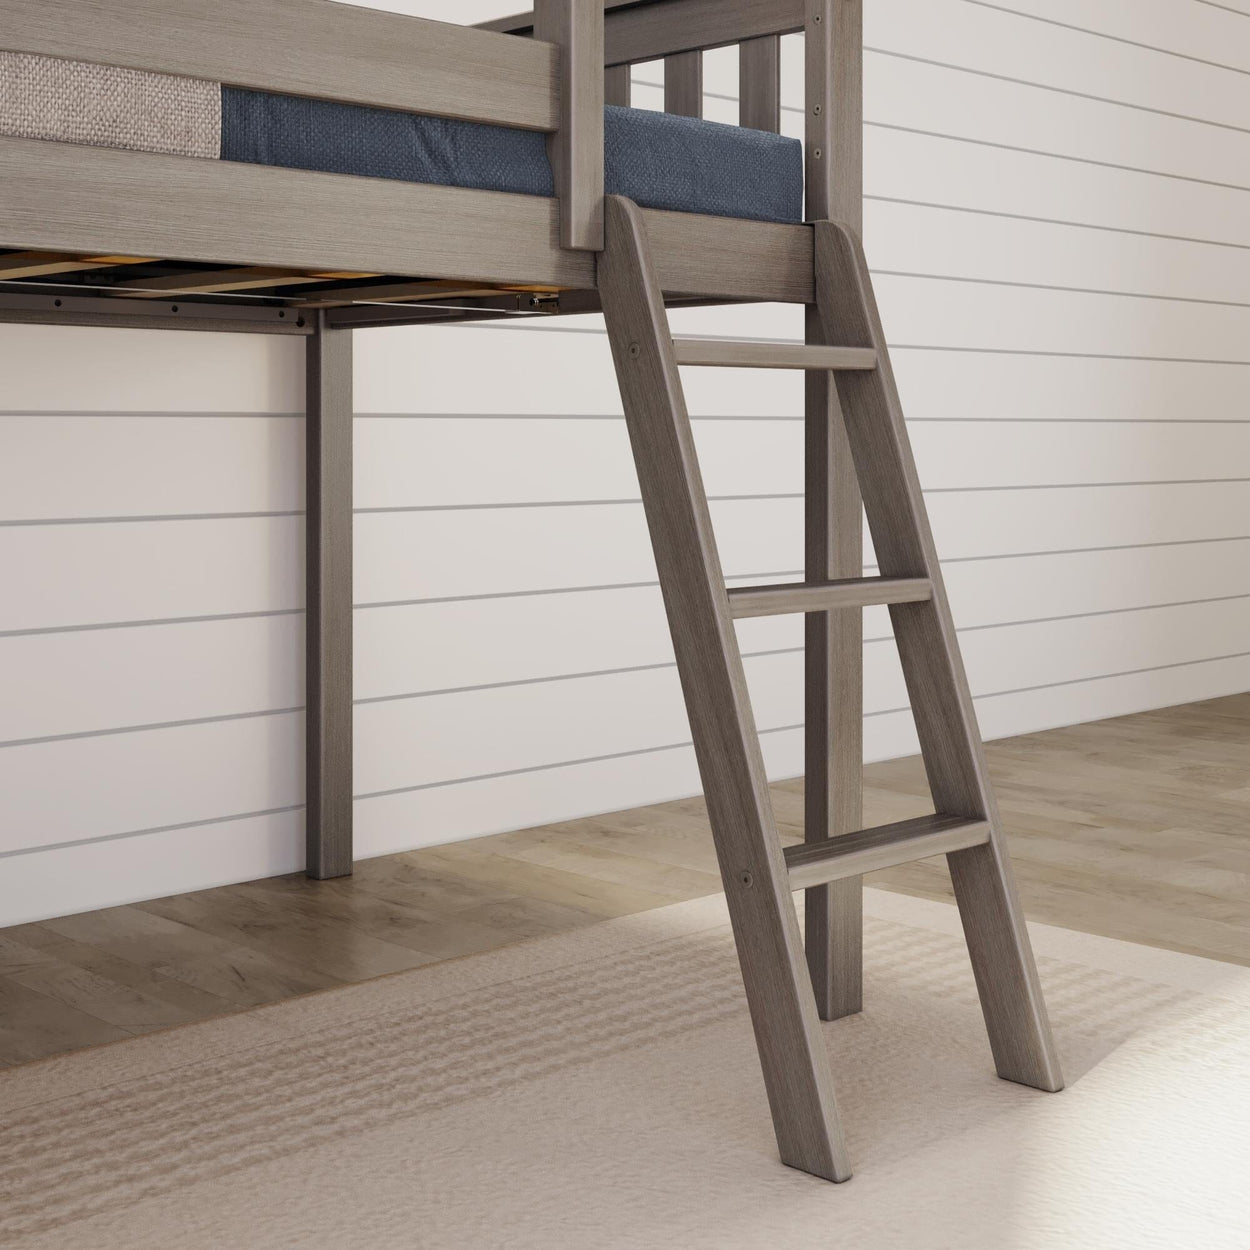 180413-151 : Loft Beds Max & Lily Twin Size Low Loft Bed with Slide and Ladder, Classic Solid Wood Kids Bedroom Furniture, 400 lbs Weight Capacity, 14" Safety Guardrail, Anti-Slip Steps, Clay